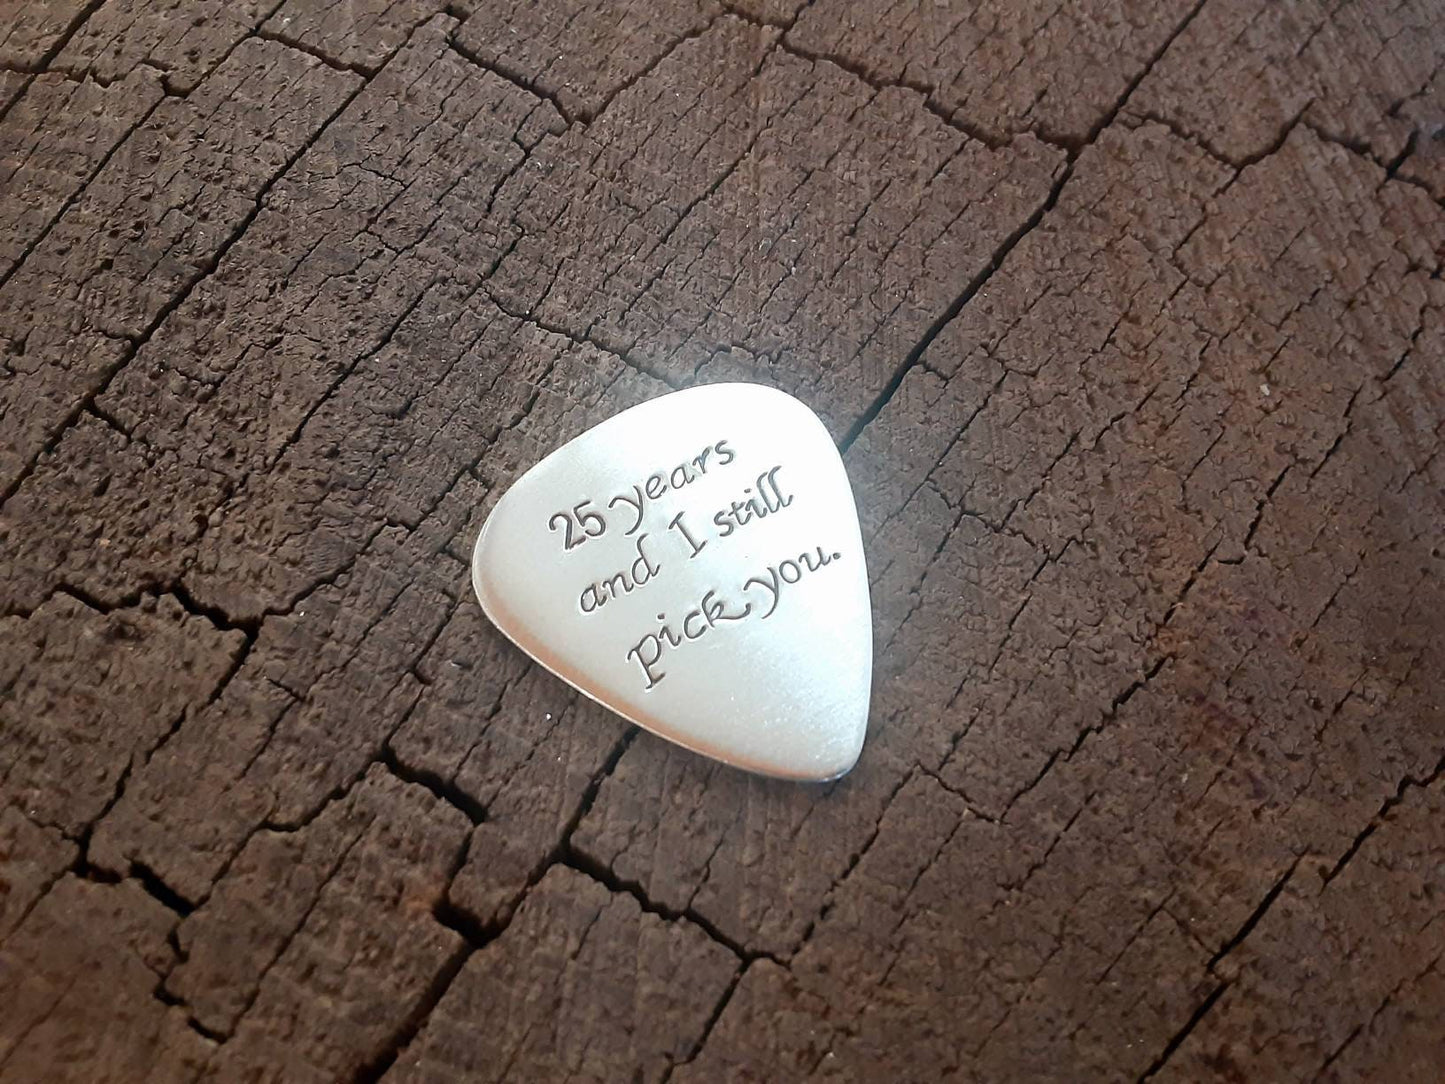 Guitar pick for the 25th silver anniversary in sterling silver